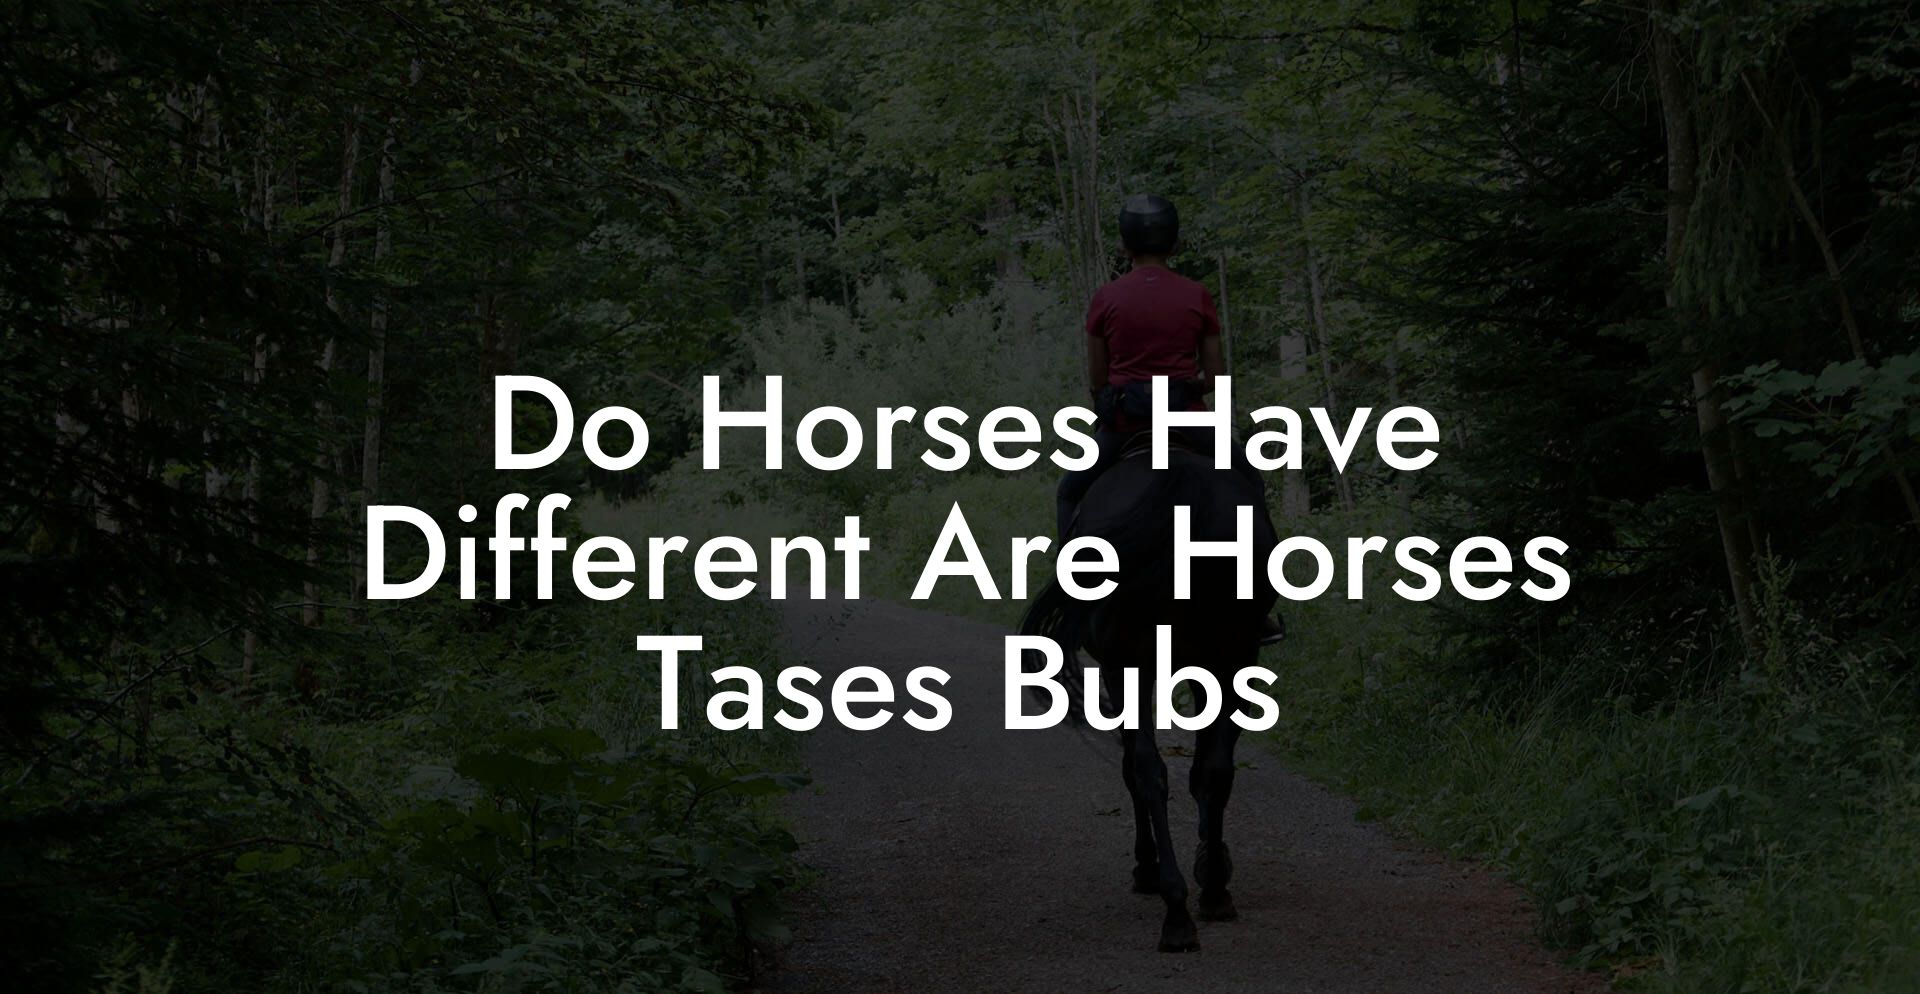 Do Horses Have Different Are Horses Tases Bubs